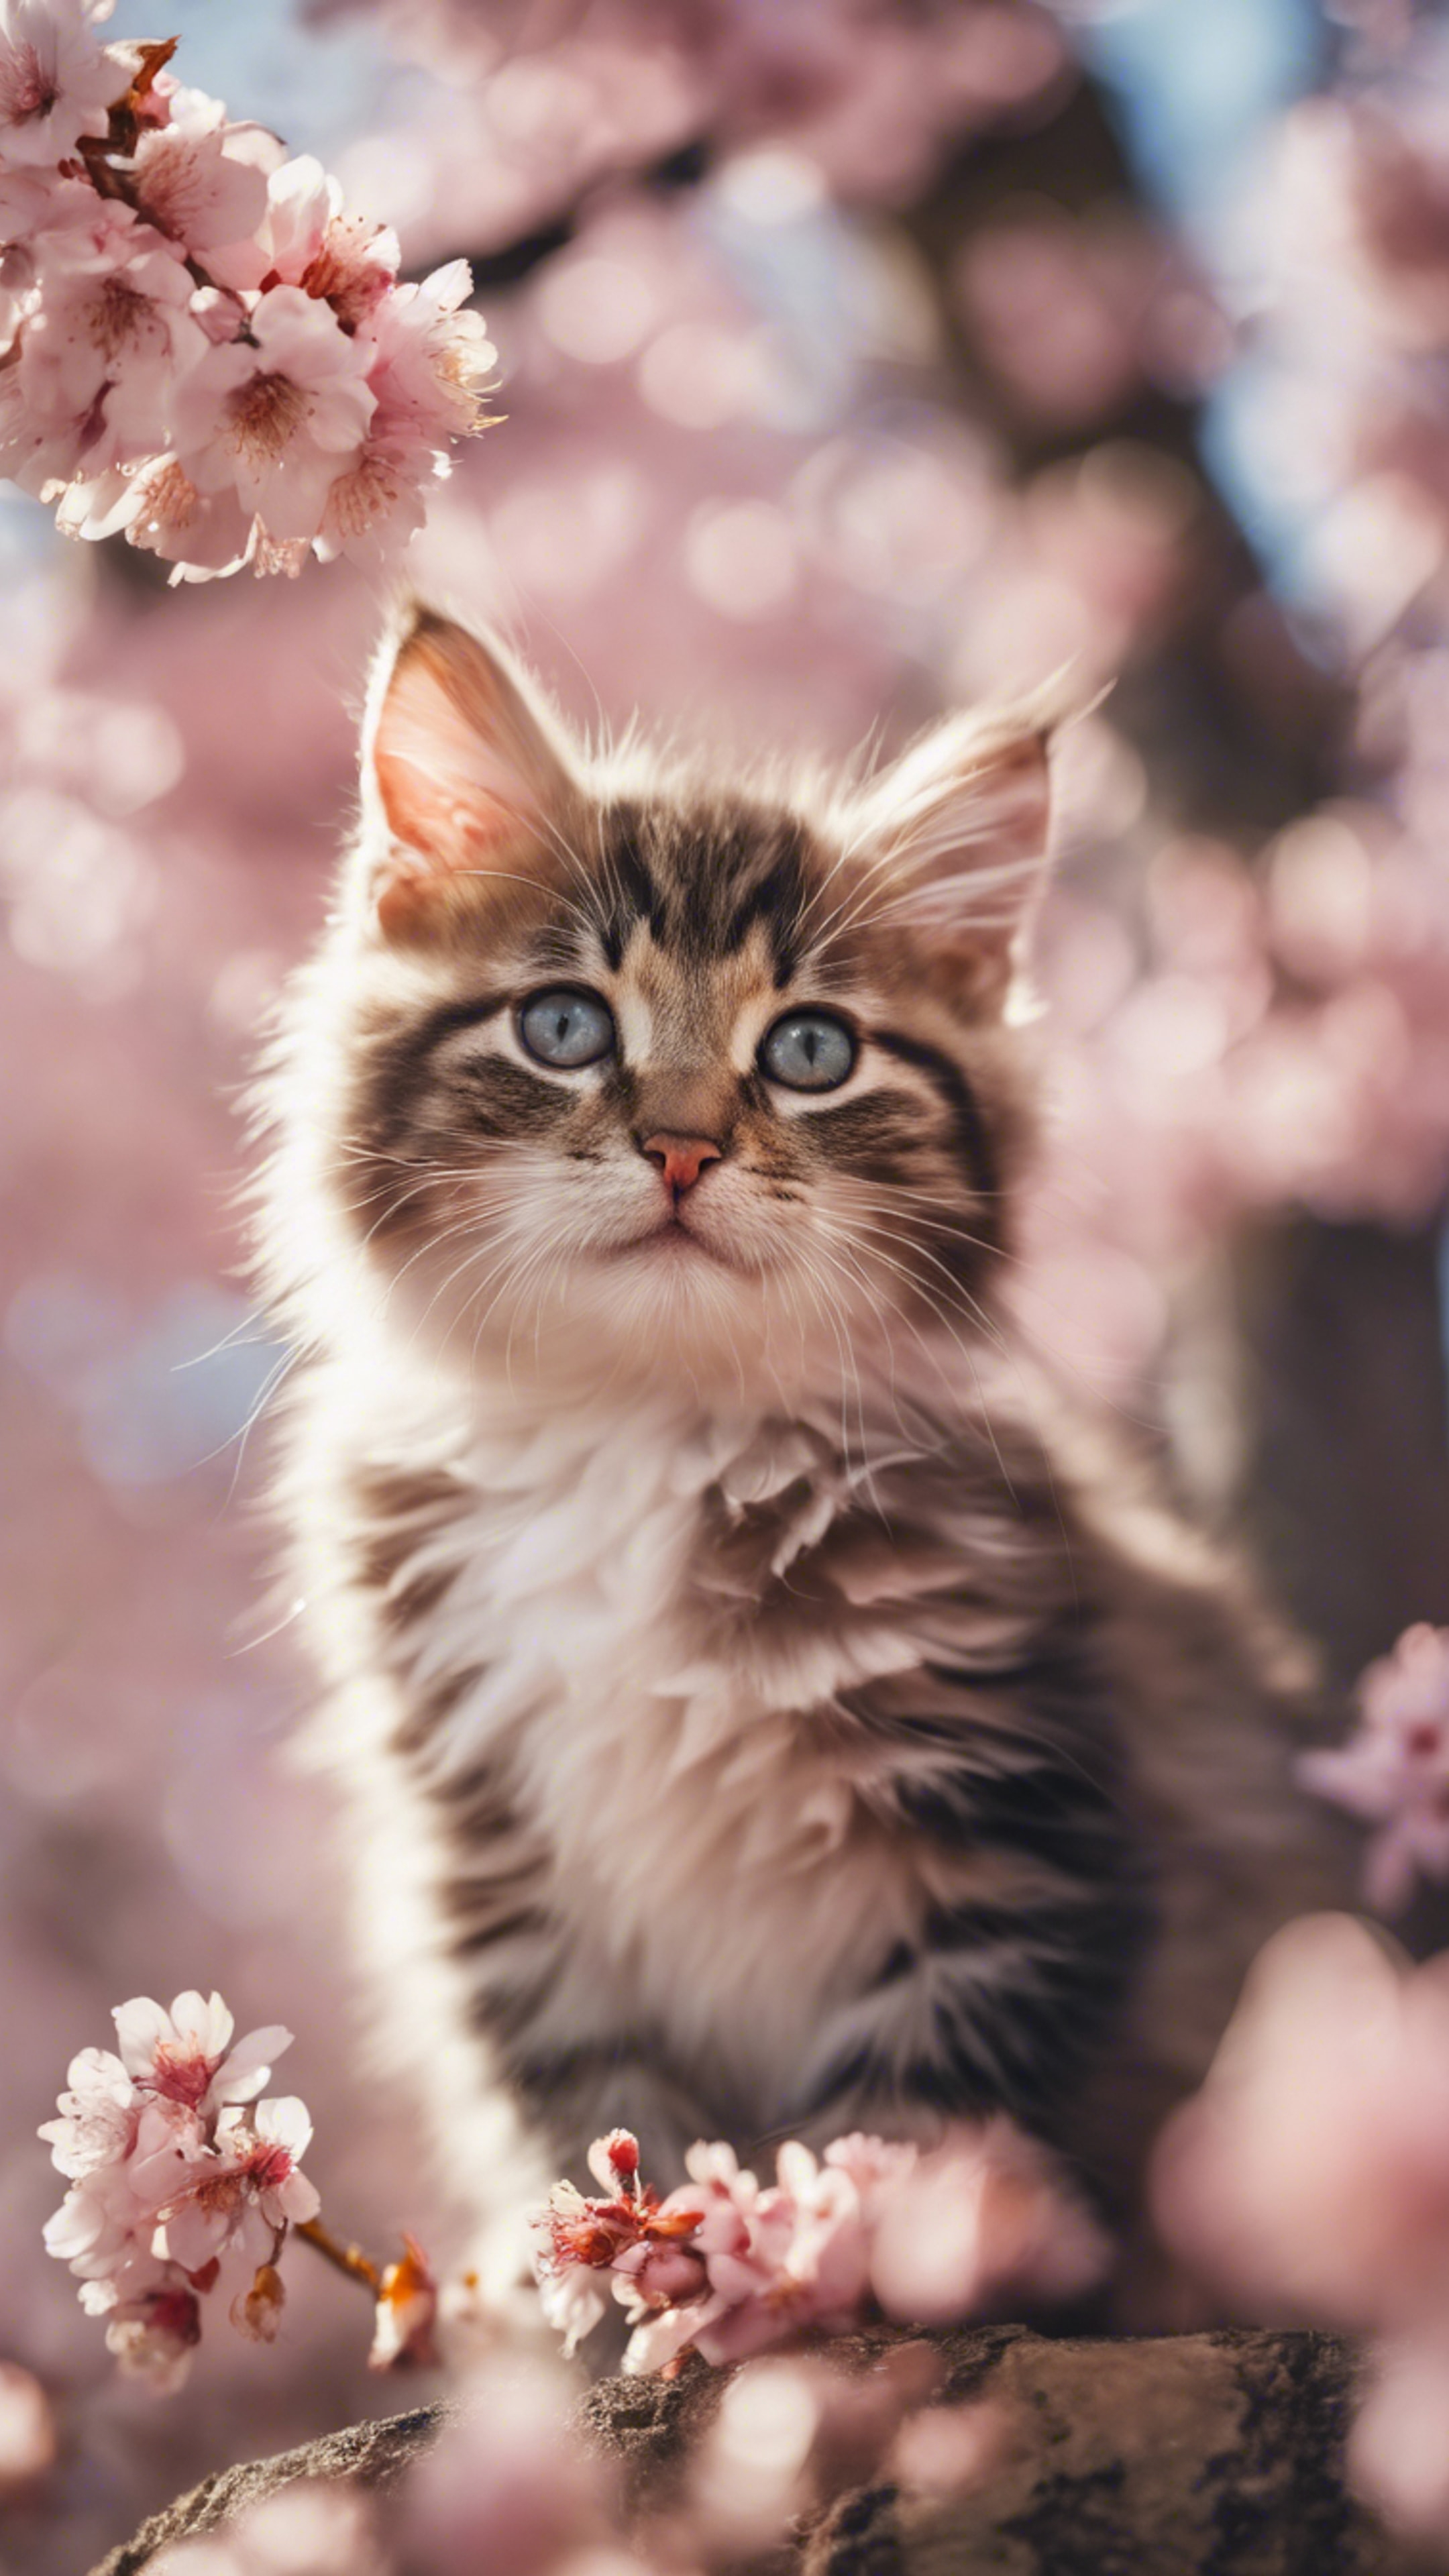 A cherry blossom tree in full bloom as the backdrop to a playful kitten in spring. ورق الجدران[56e1c1b9132e46d98bd1]